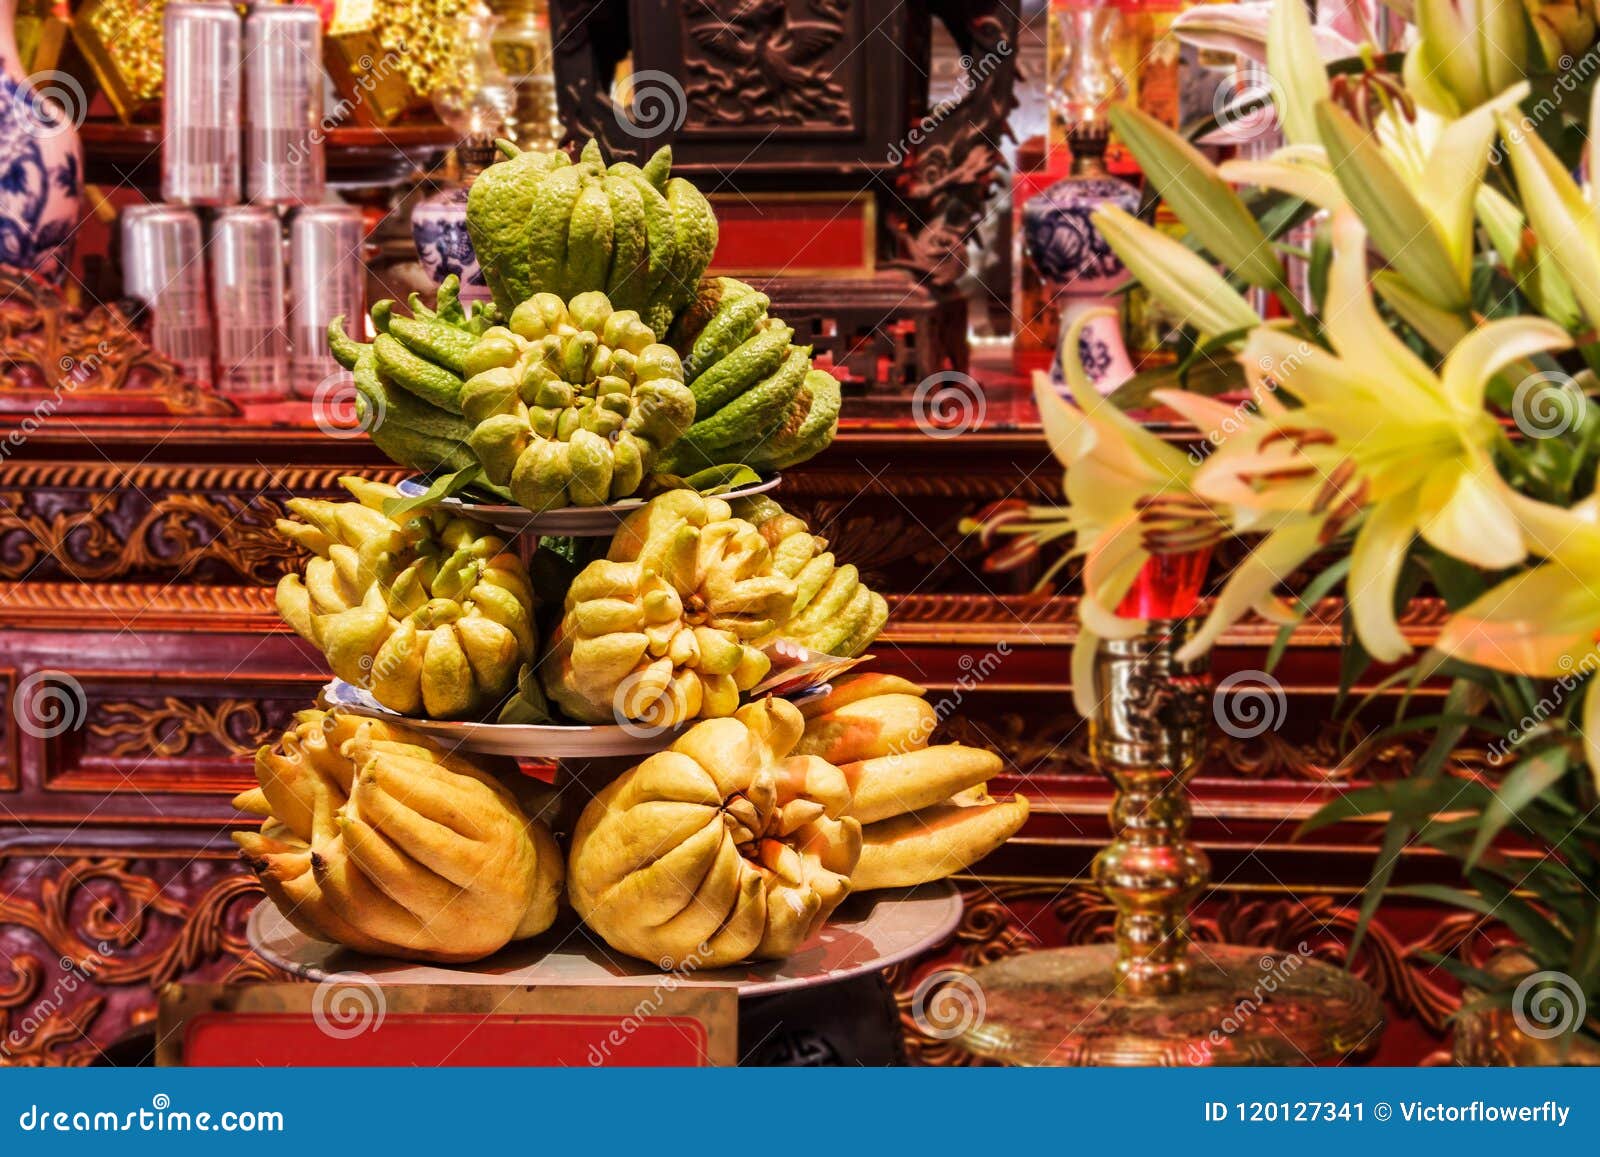 buddha`s hand citrus medica var. sarcodactylus or fingered citron, vietnamese - phat thu.the fruit given as religious offering